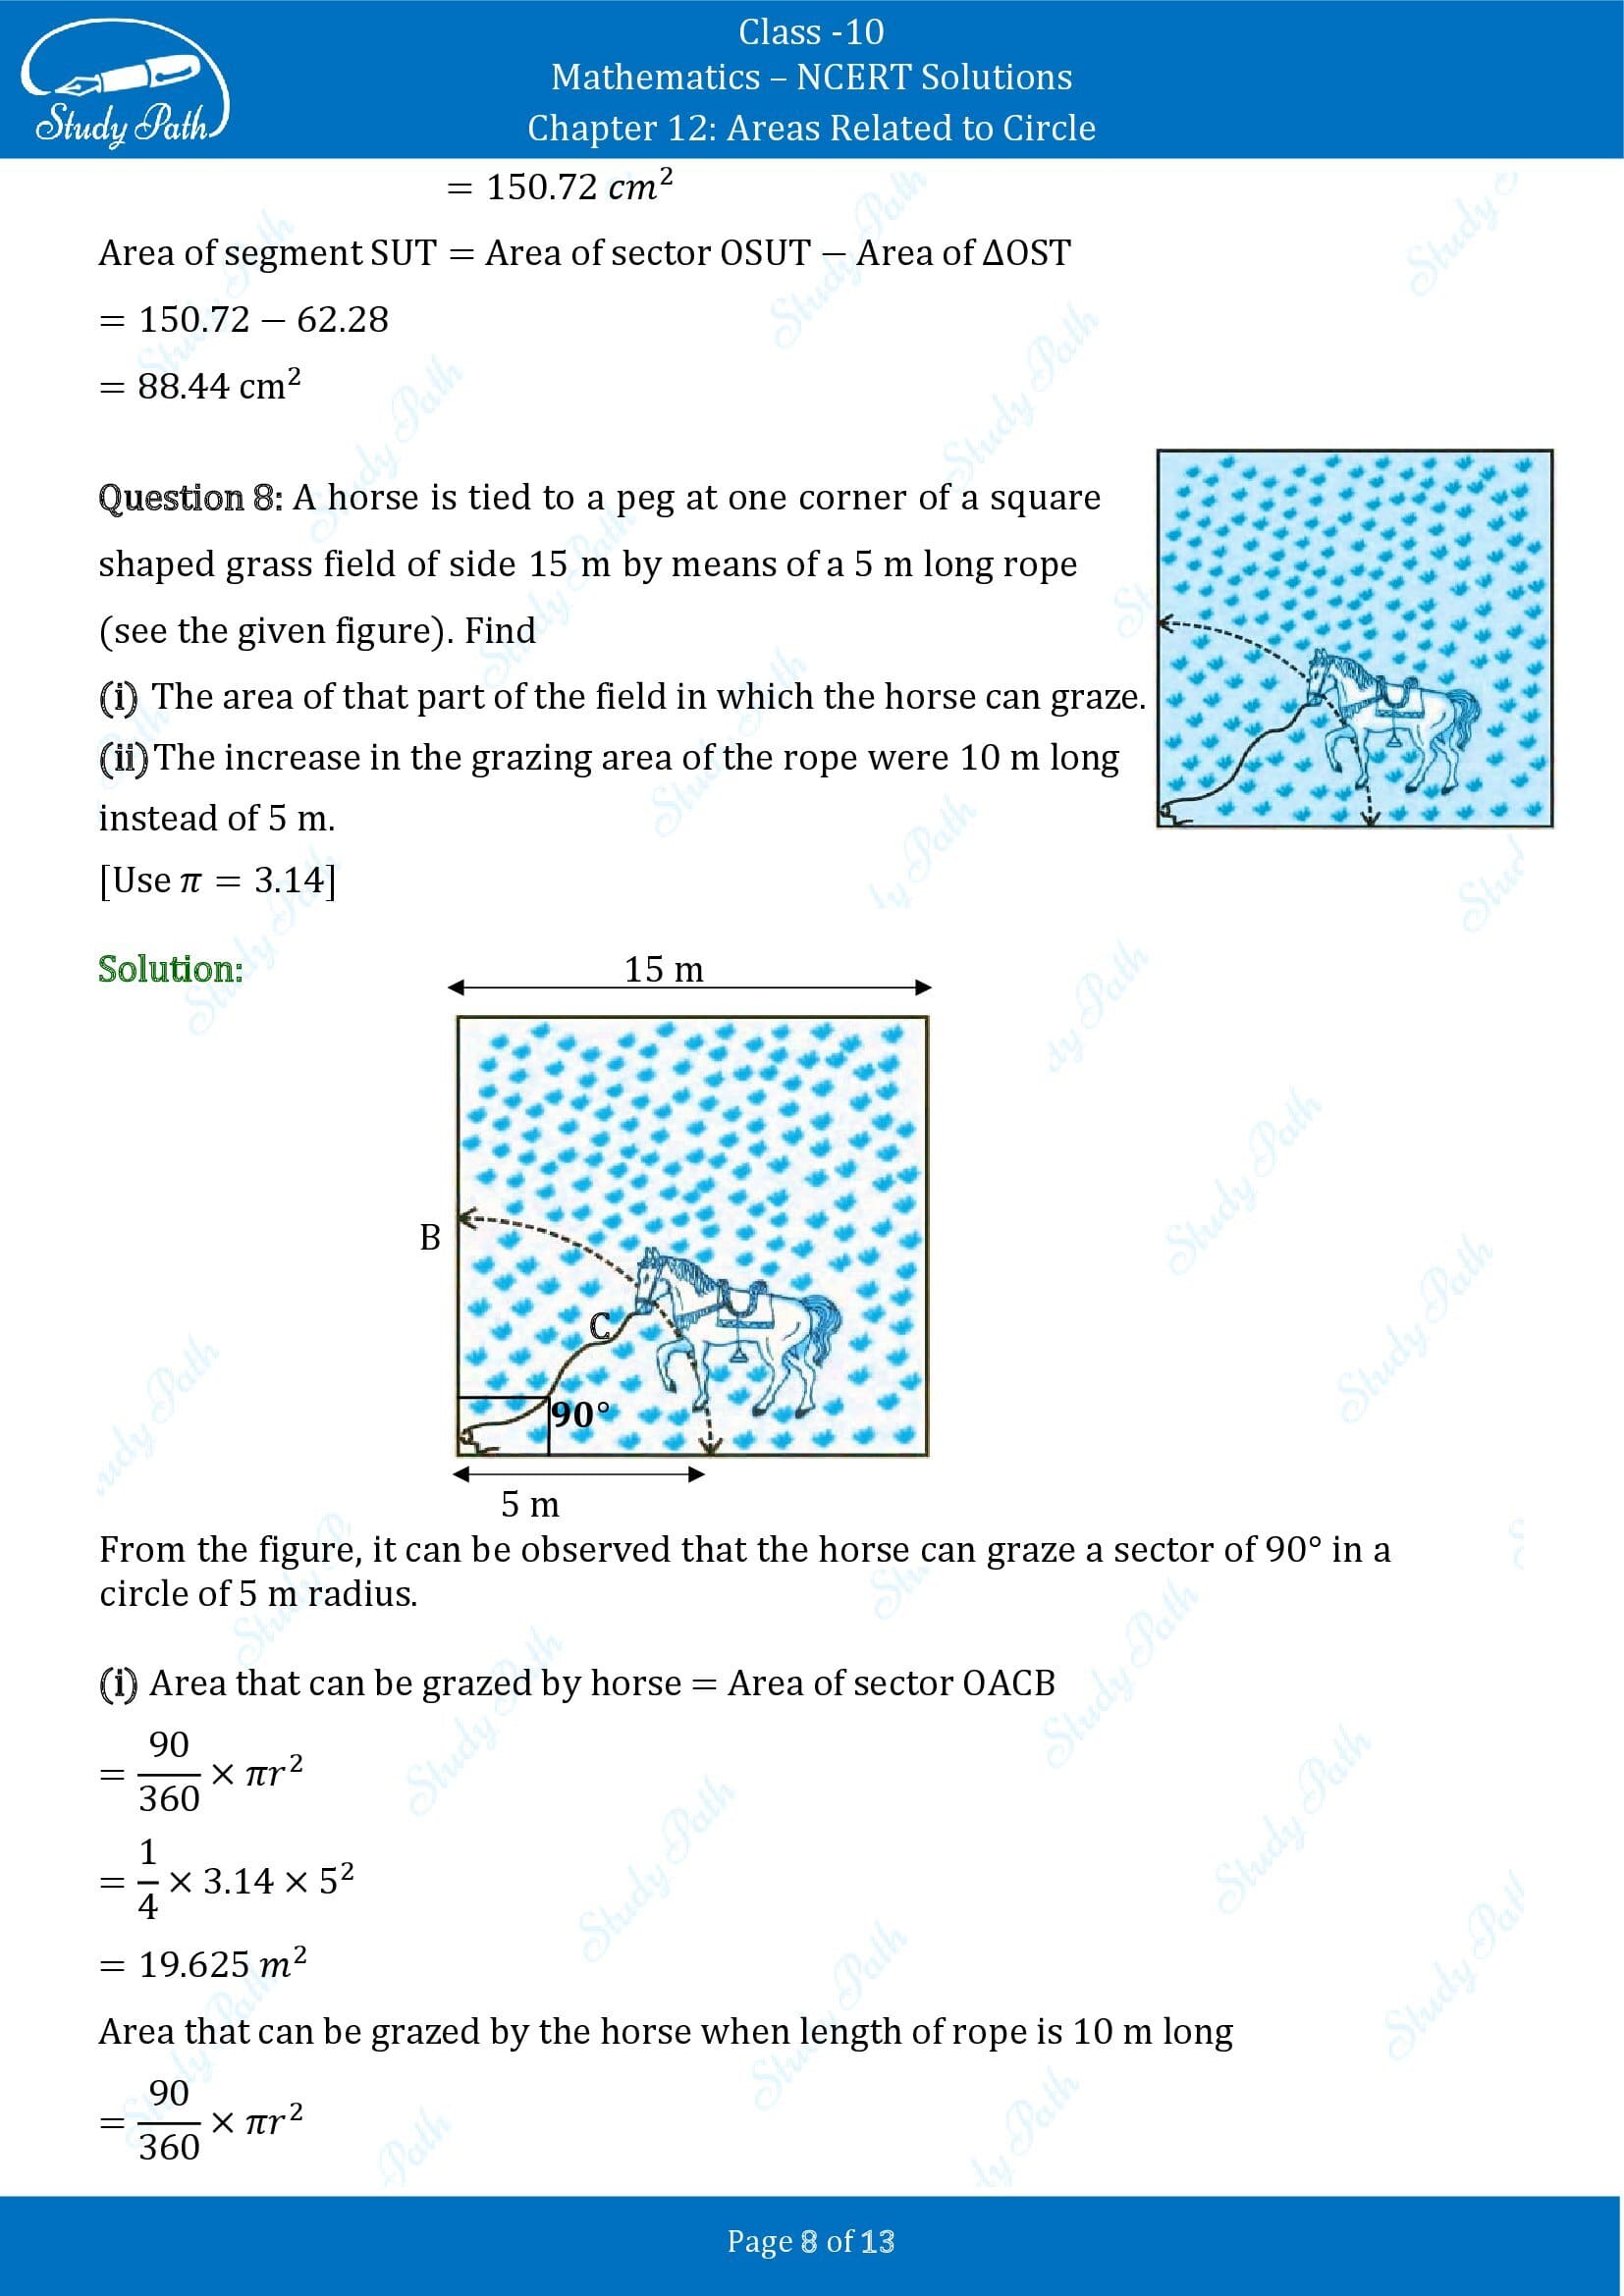 NCERT Solutions for Class 10 Maths Chapter 12 Areas Related to Circles Exercise 12.2 00008